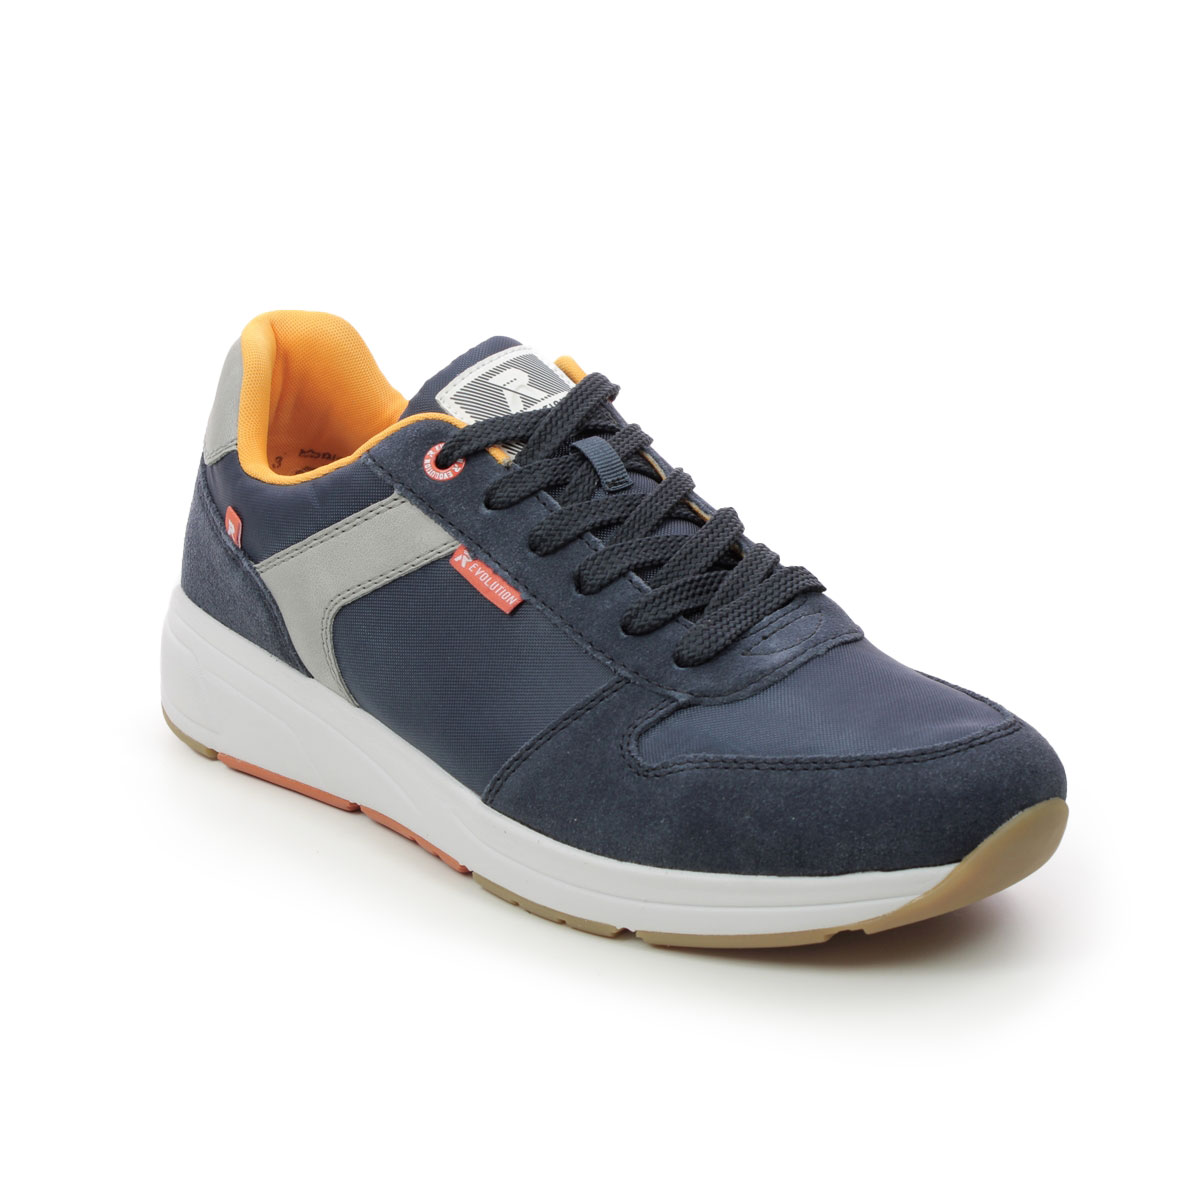 Rieker Archy Evo Navy Mens Trainers 07002-14 In Size 46 In Plain Navy